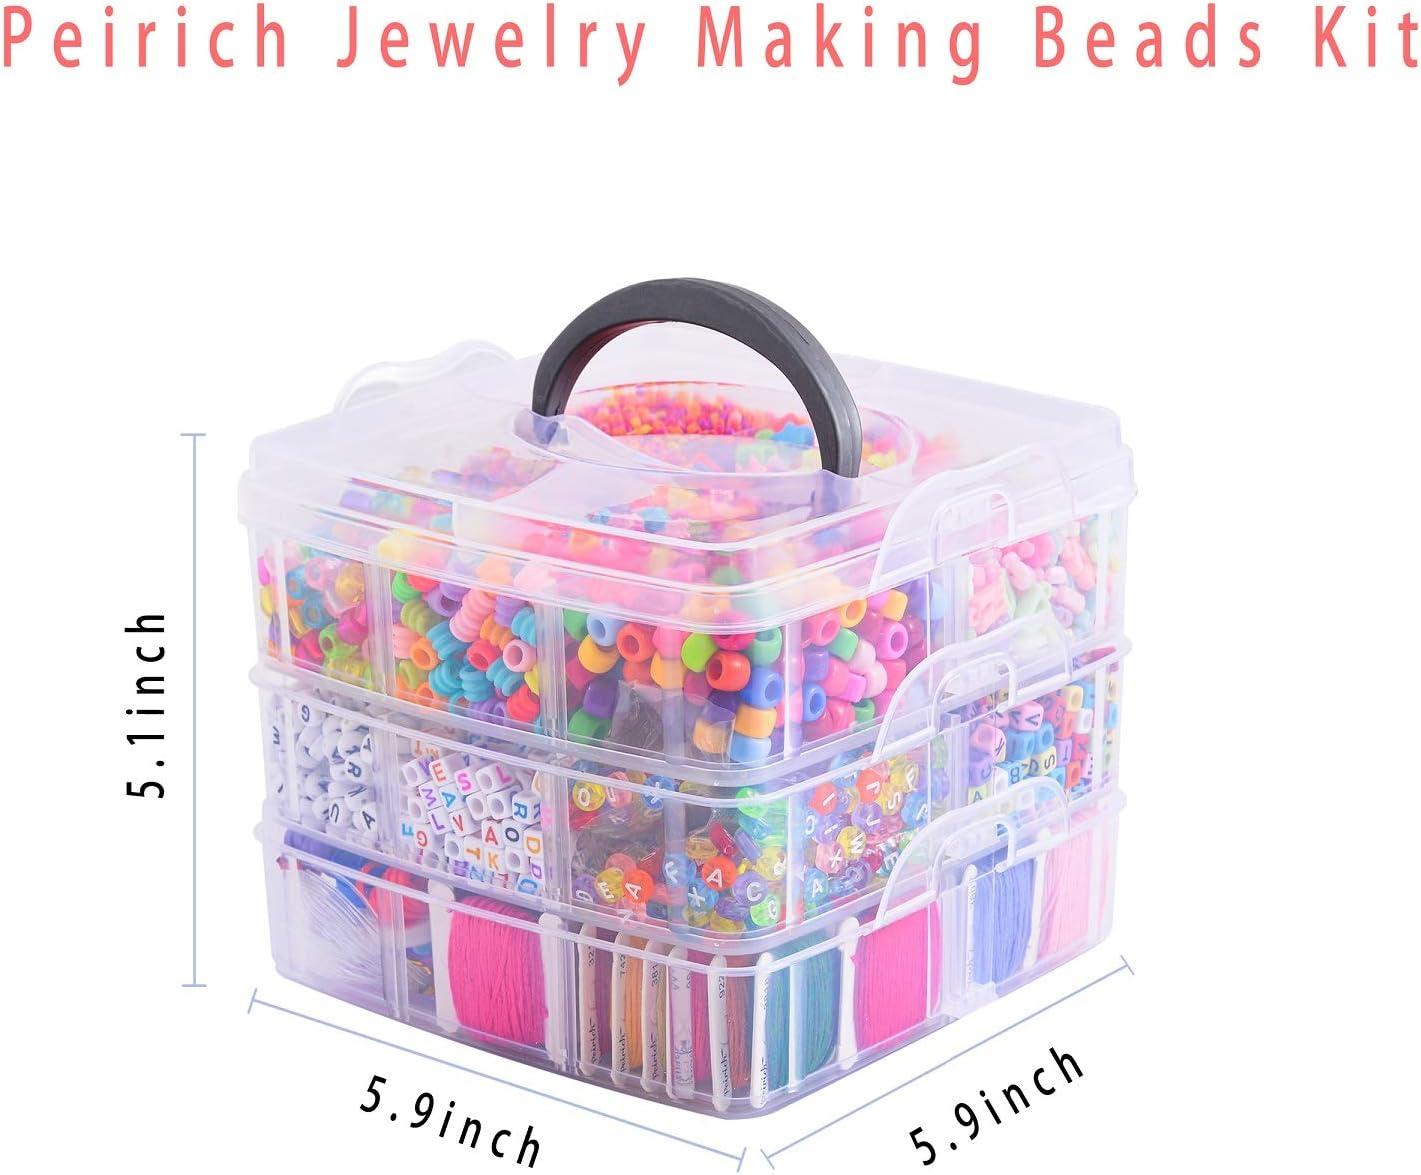 Peirich Jewelry Making Bead Kits, Includes 44 Embroidery Floss with 3-Tier  Organizer Storage Box with Threads, Over 4900 Beads for Friendship